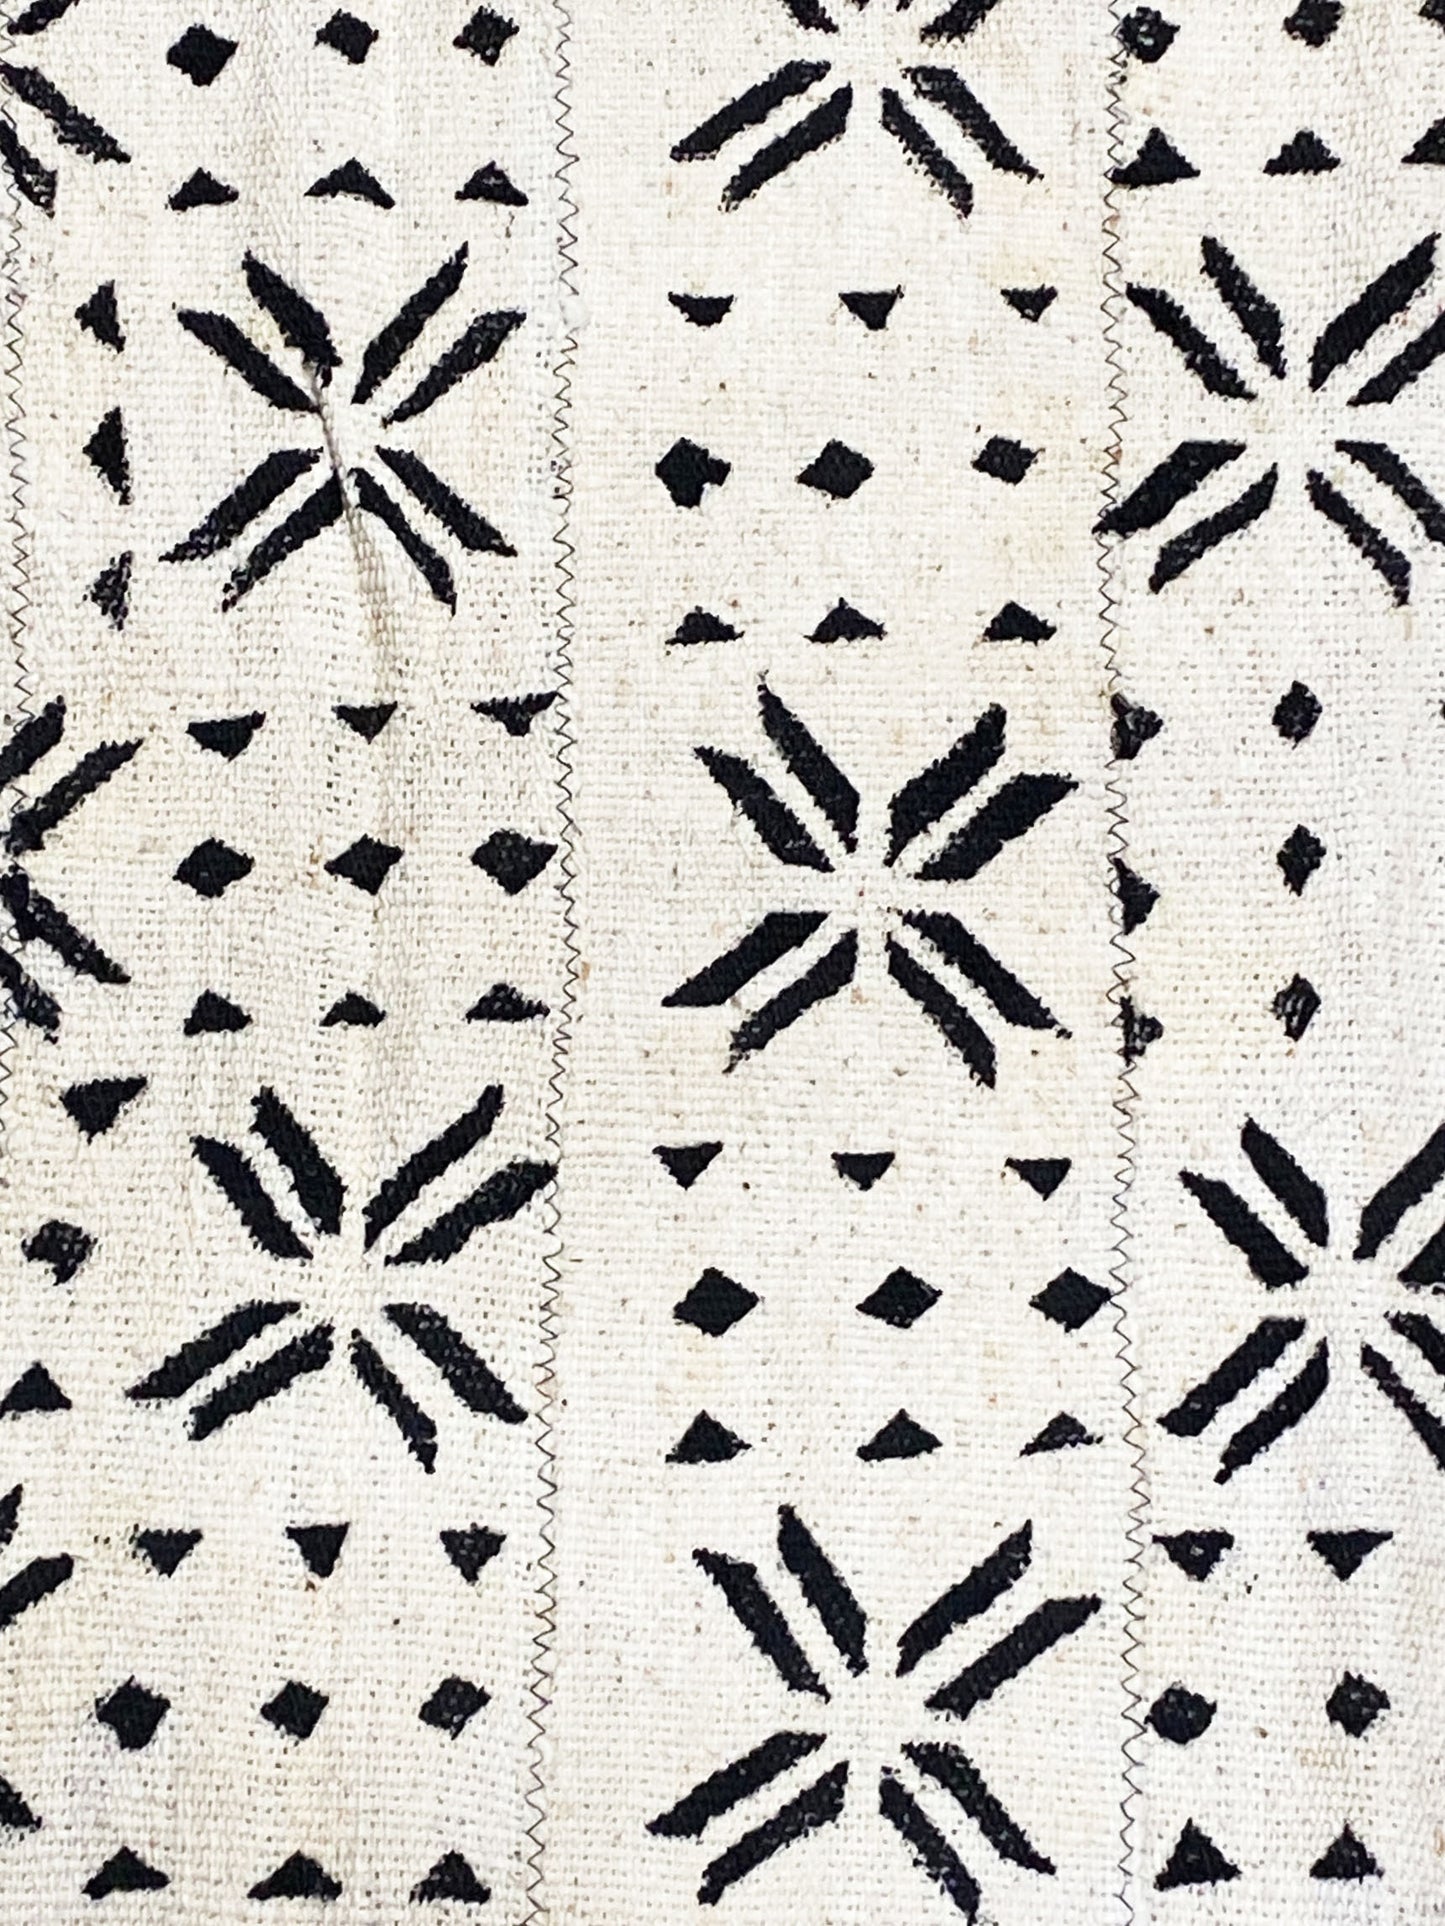 #5341 African  Black and White Mud Cloth Textile Mali 37" by 65"